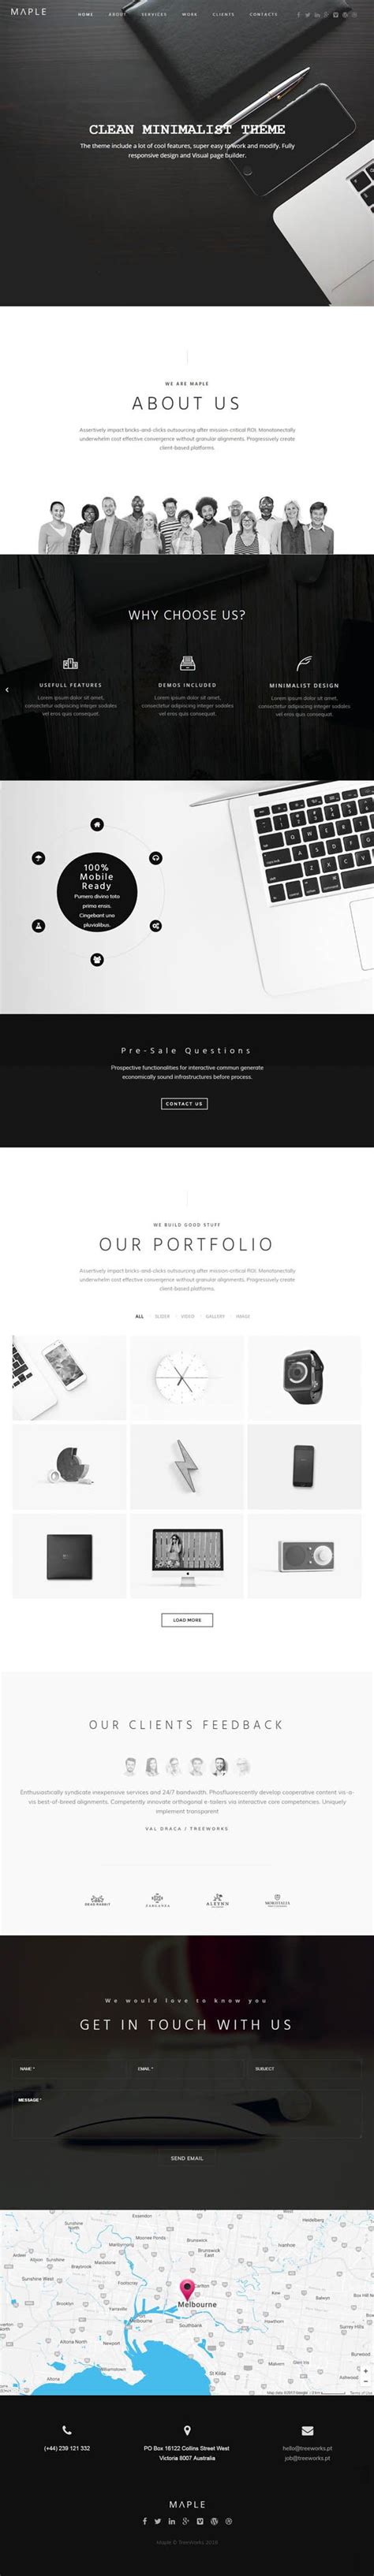 25 Best Responsive Wordpress Themes For 2017 Graphic Design Junction